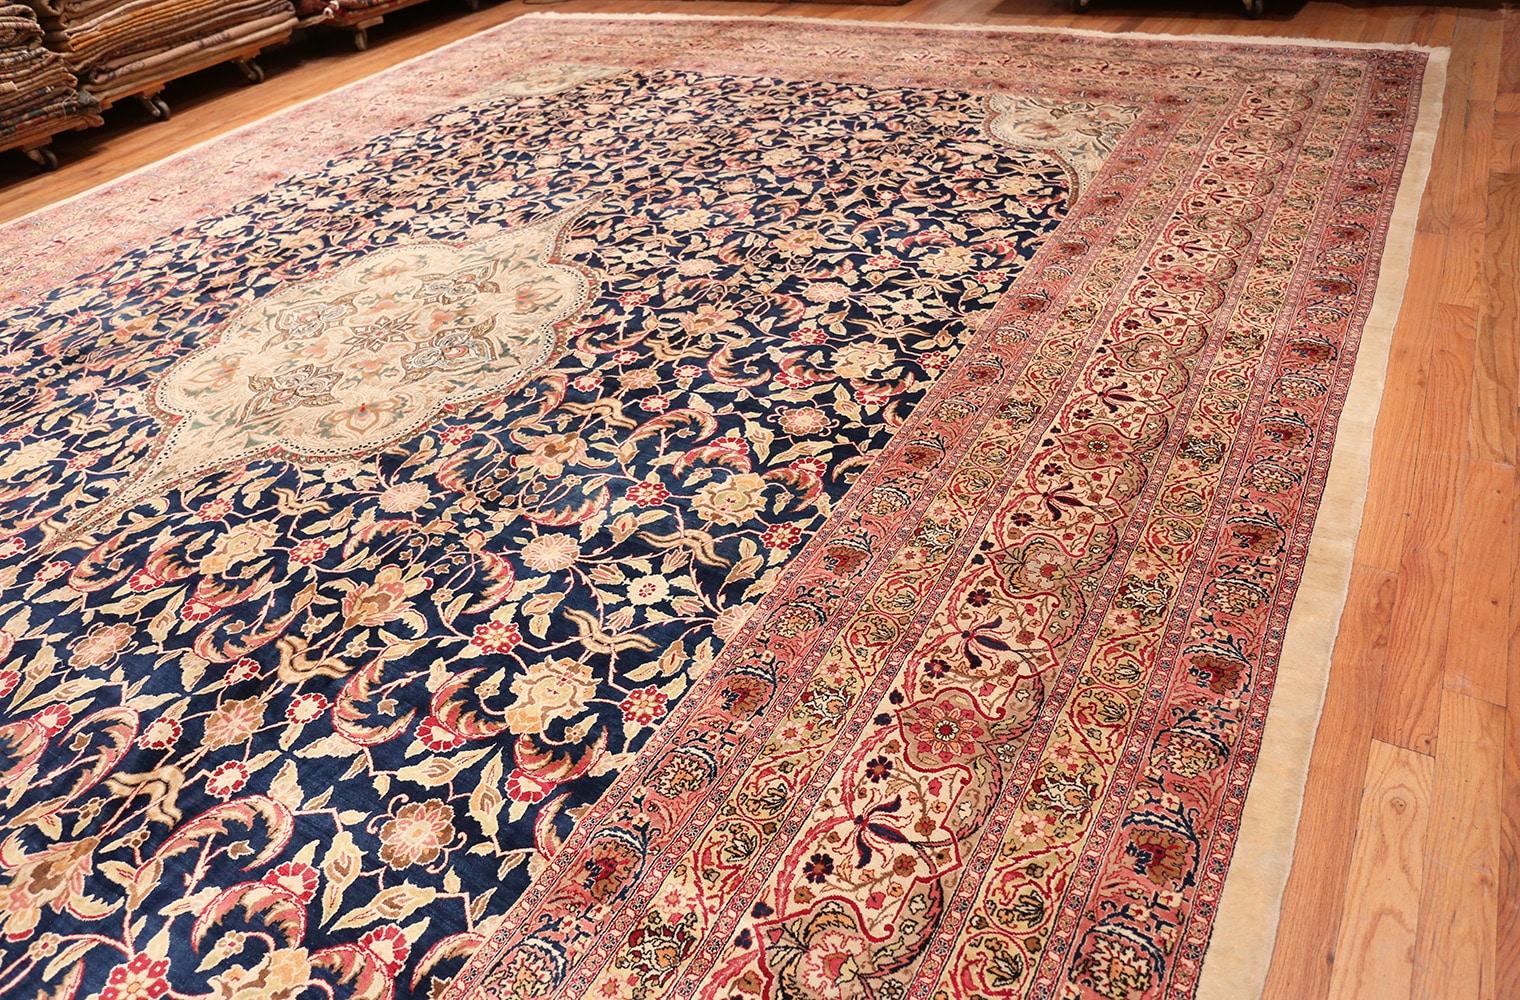 Beautiful and finely woven large oversized antique Persian Kerman rug, country of origin / rug type: Persian rugs, date: circa 1890's. Size: 16 ft x 22 ft 6 in (4.88 m x 6.86 m). 

